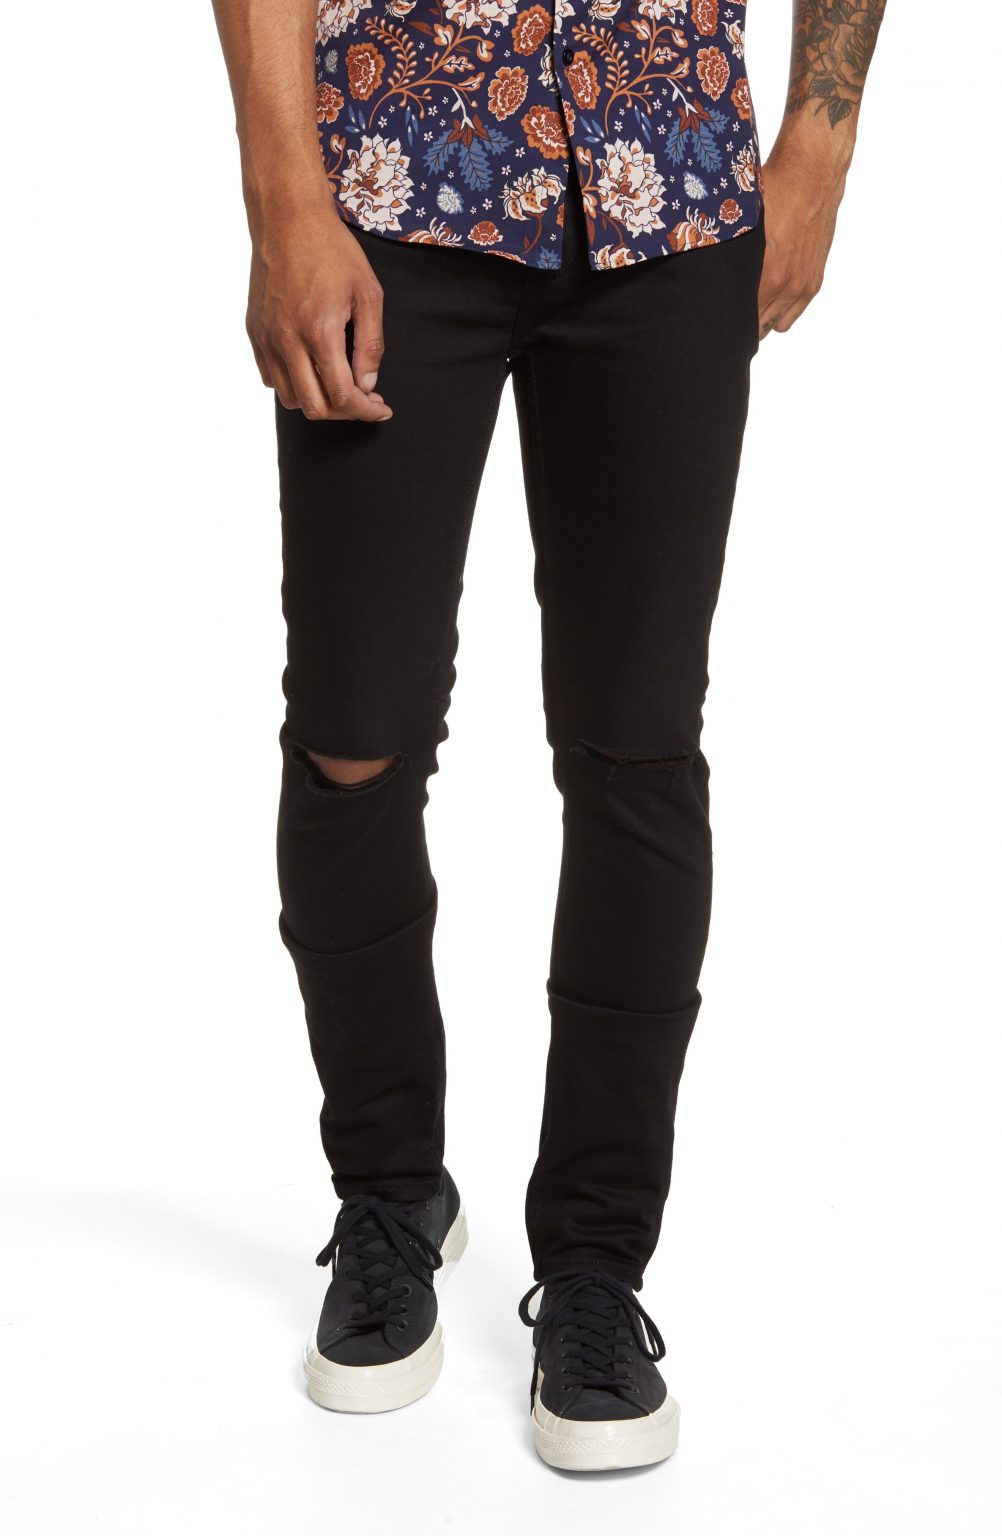 Mens Topman Ripped Skinny Jeans Size 28 X 32 Black The Fashionisto